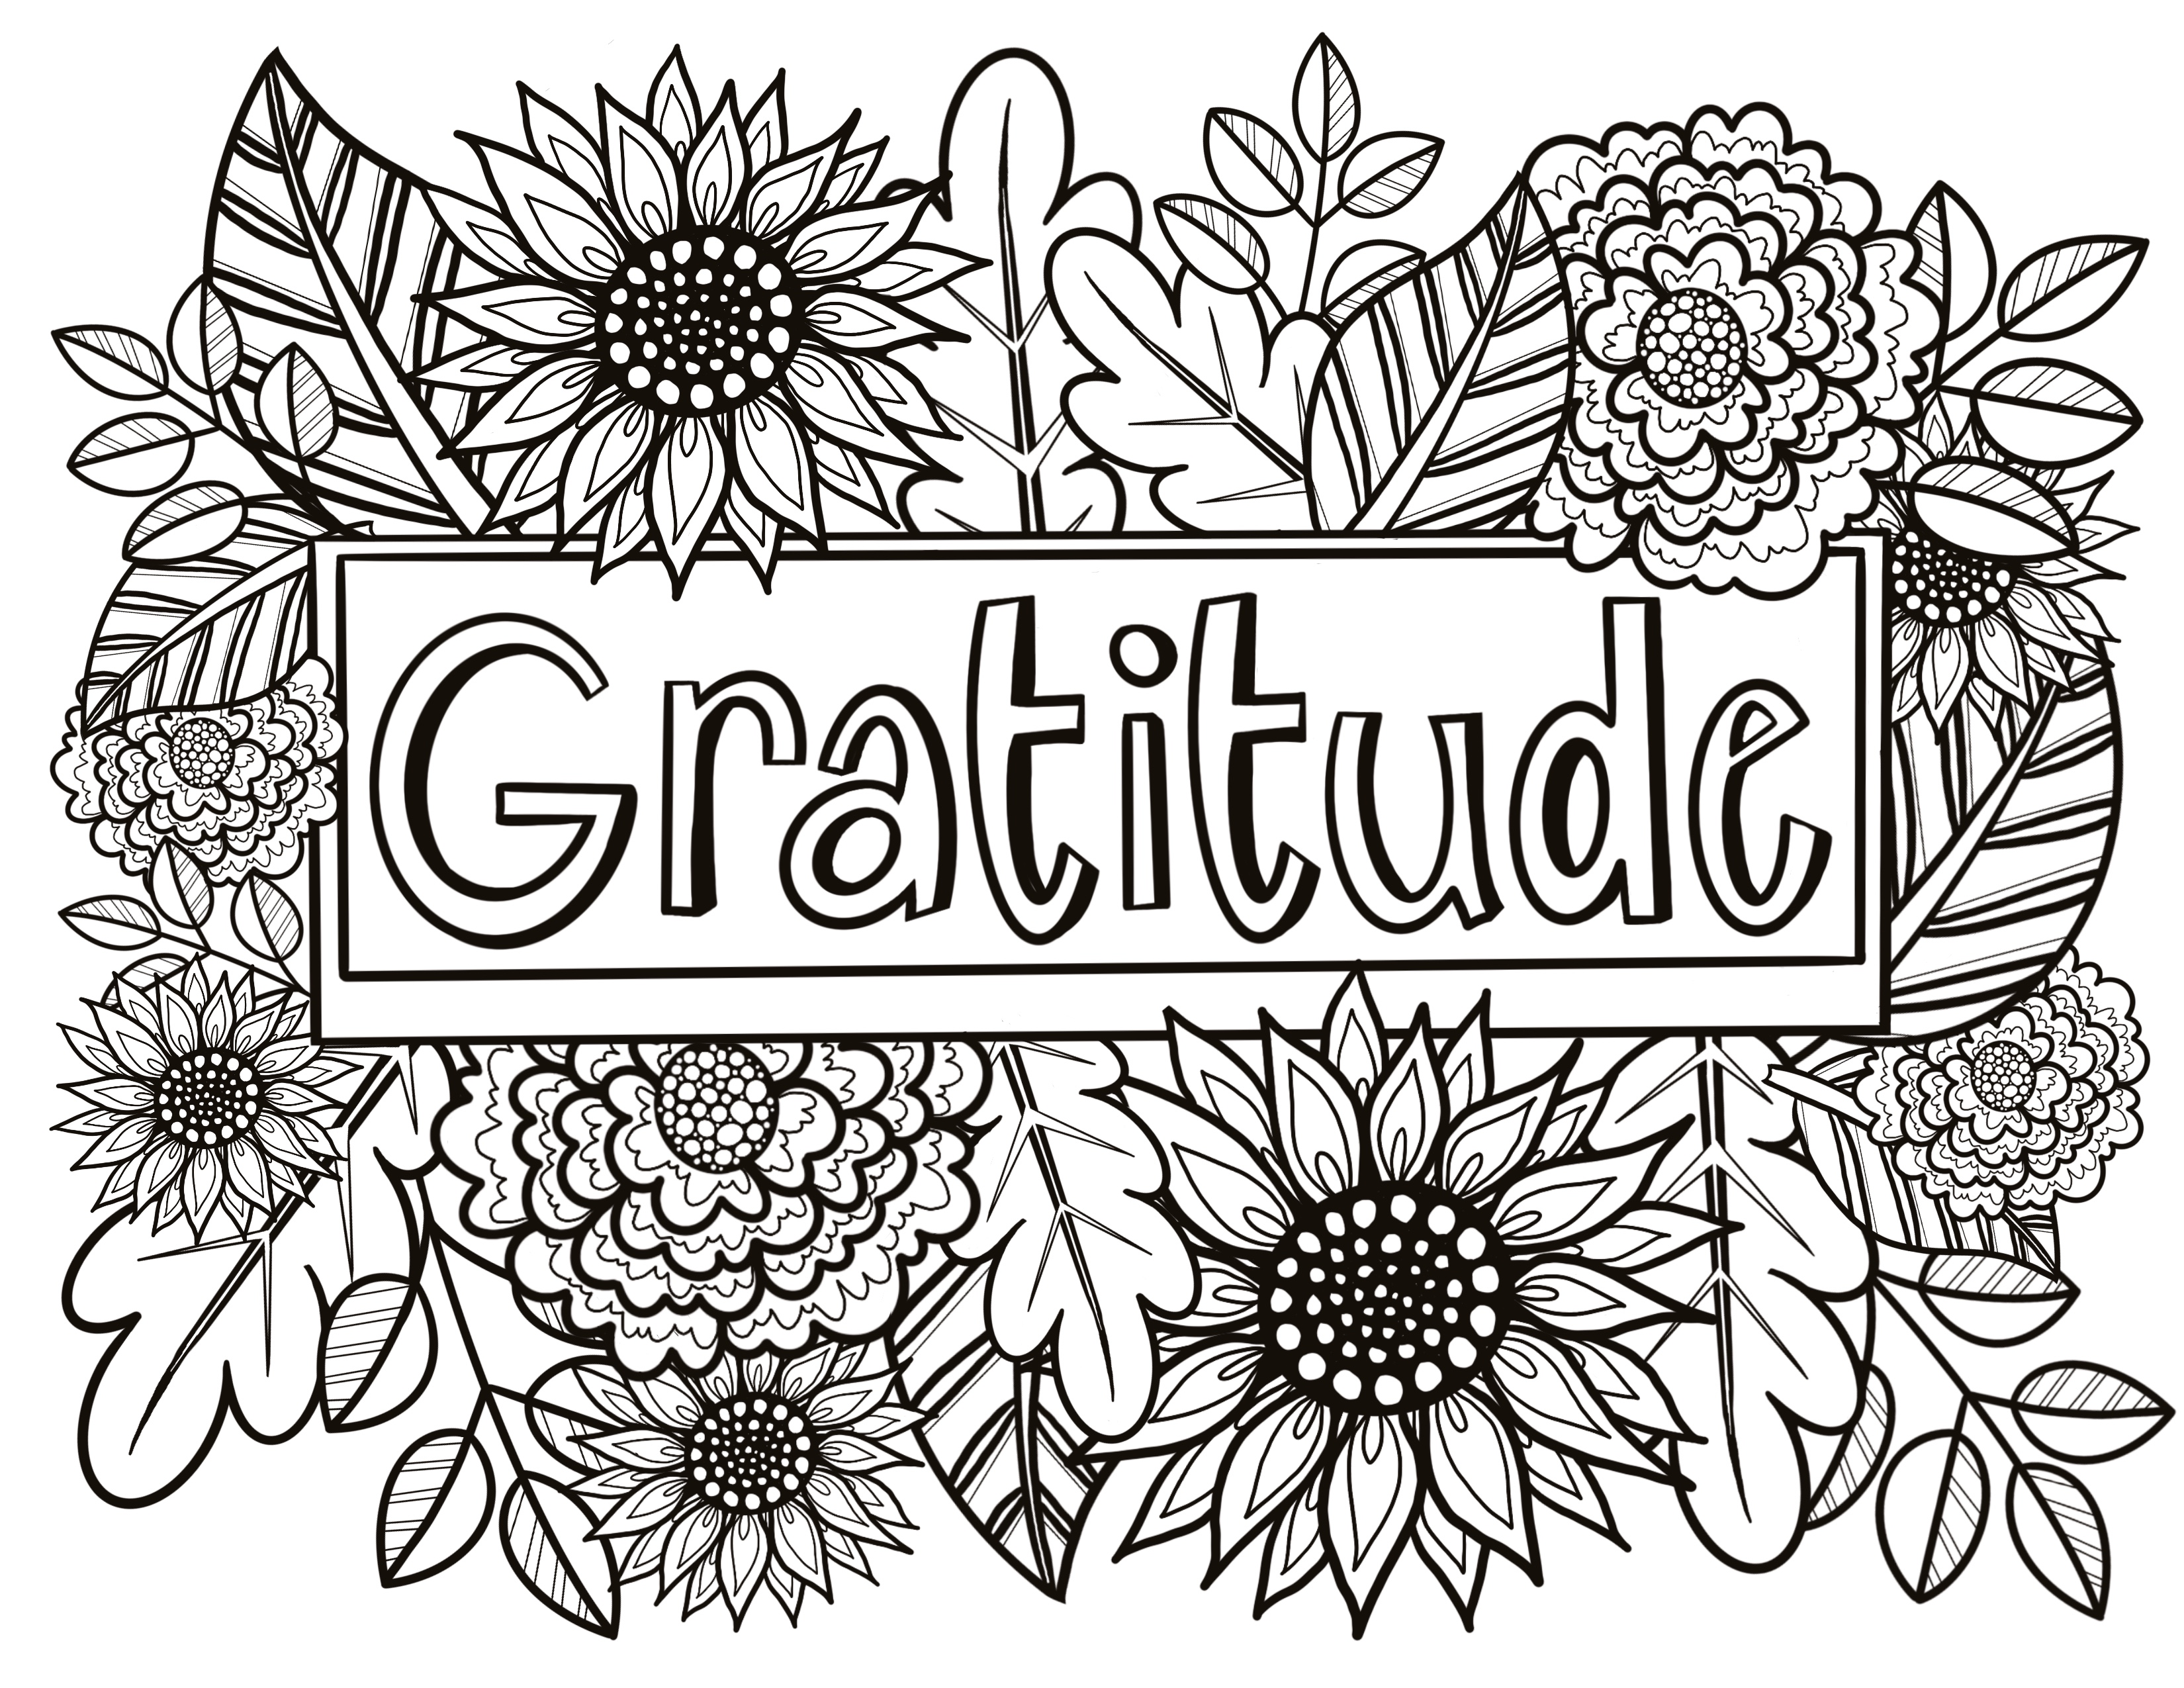 III. How Coloring Books Help in Expressing Gratitude